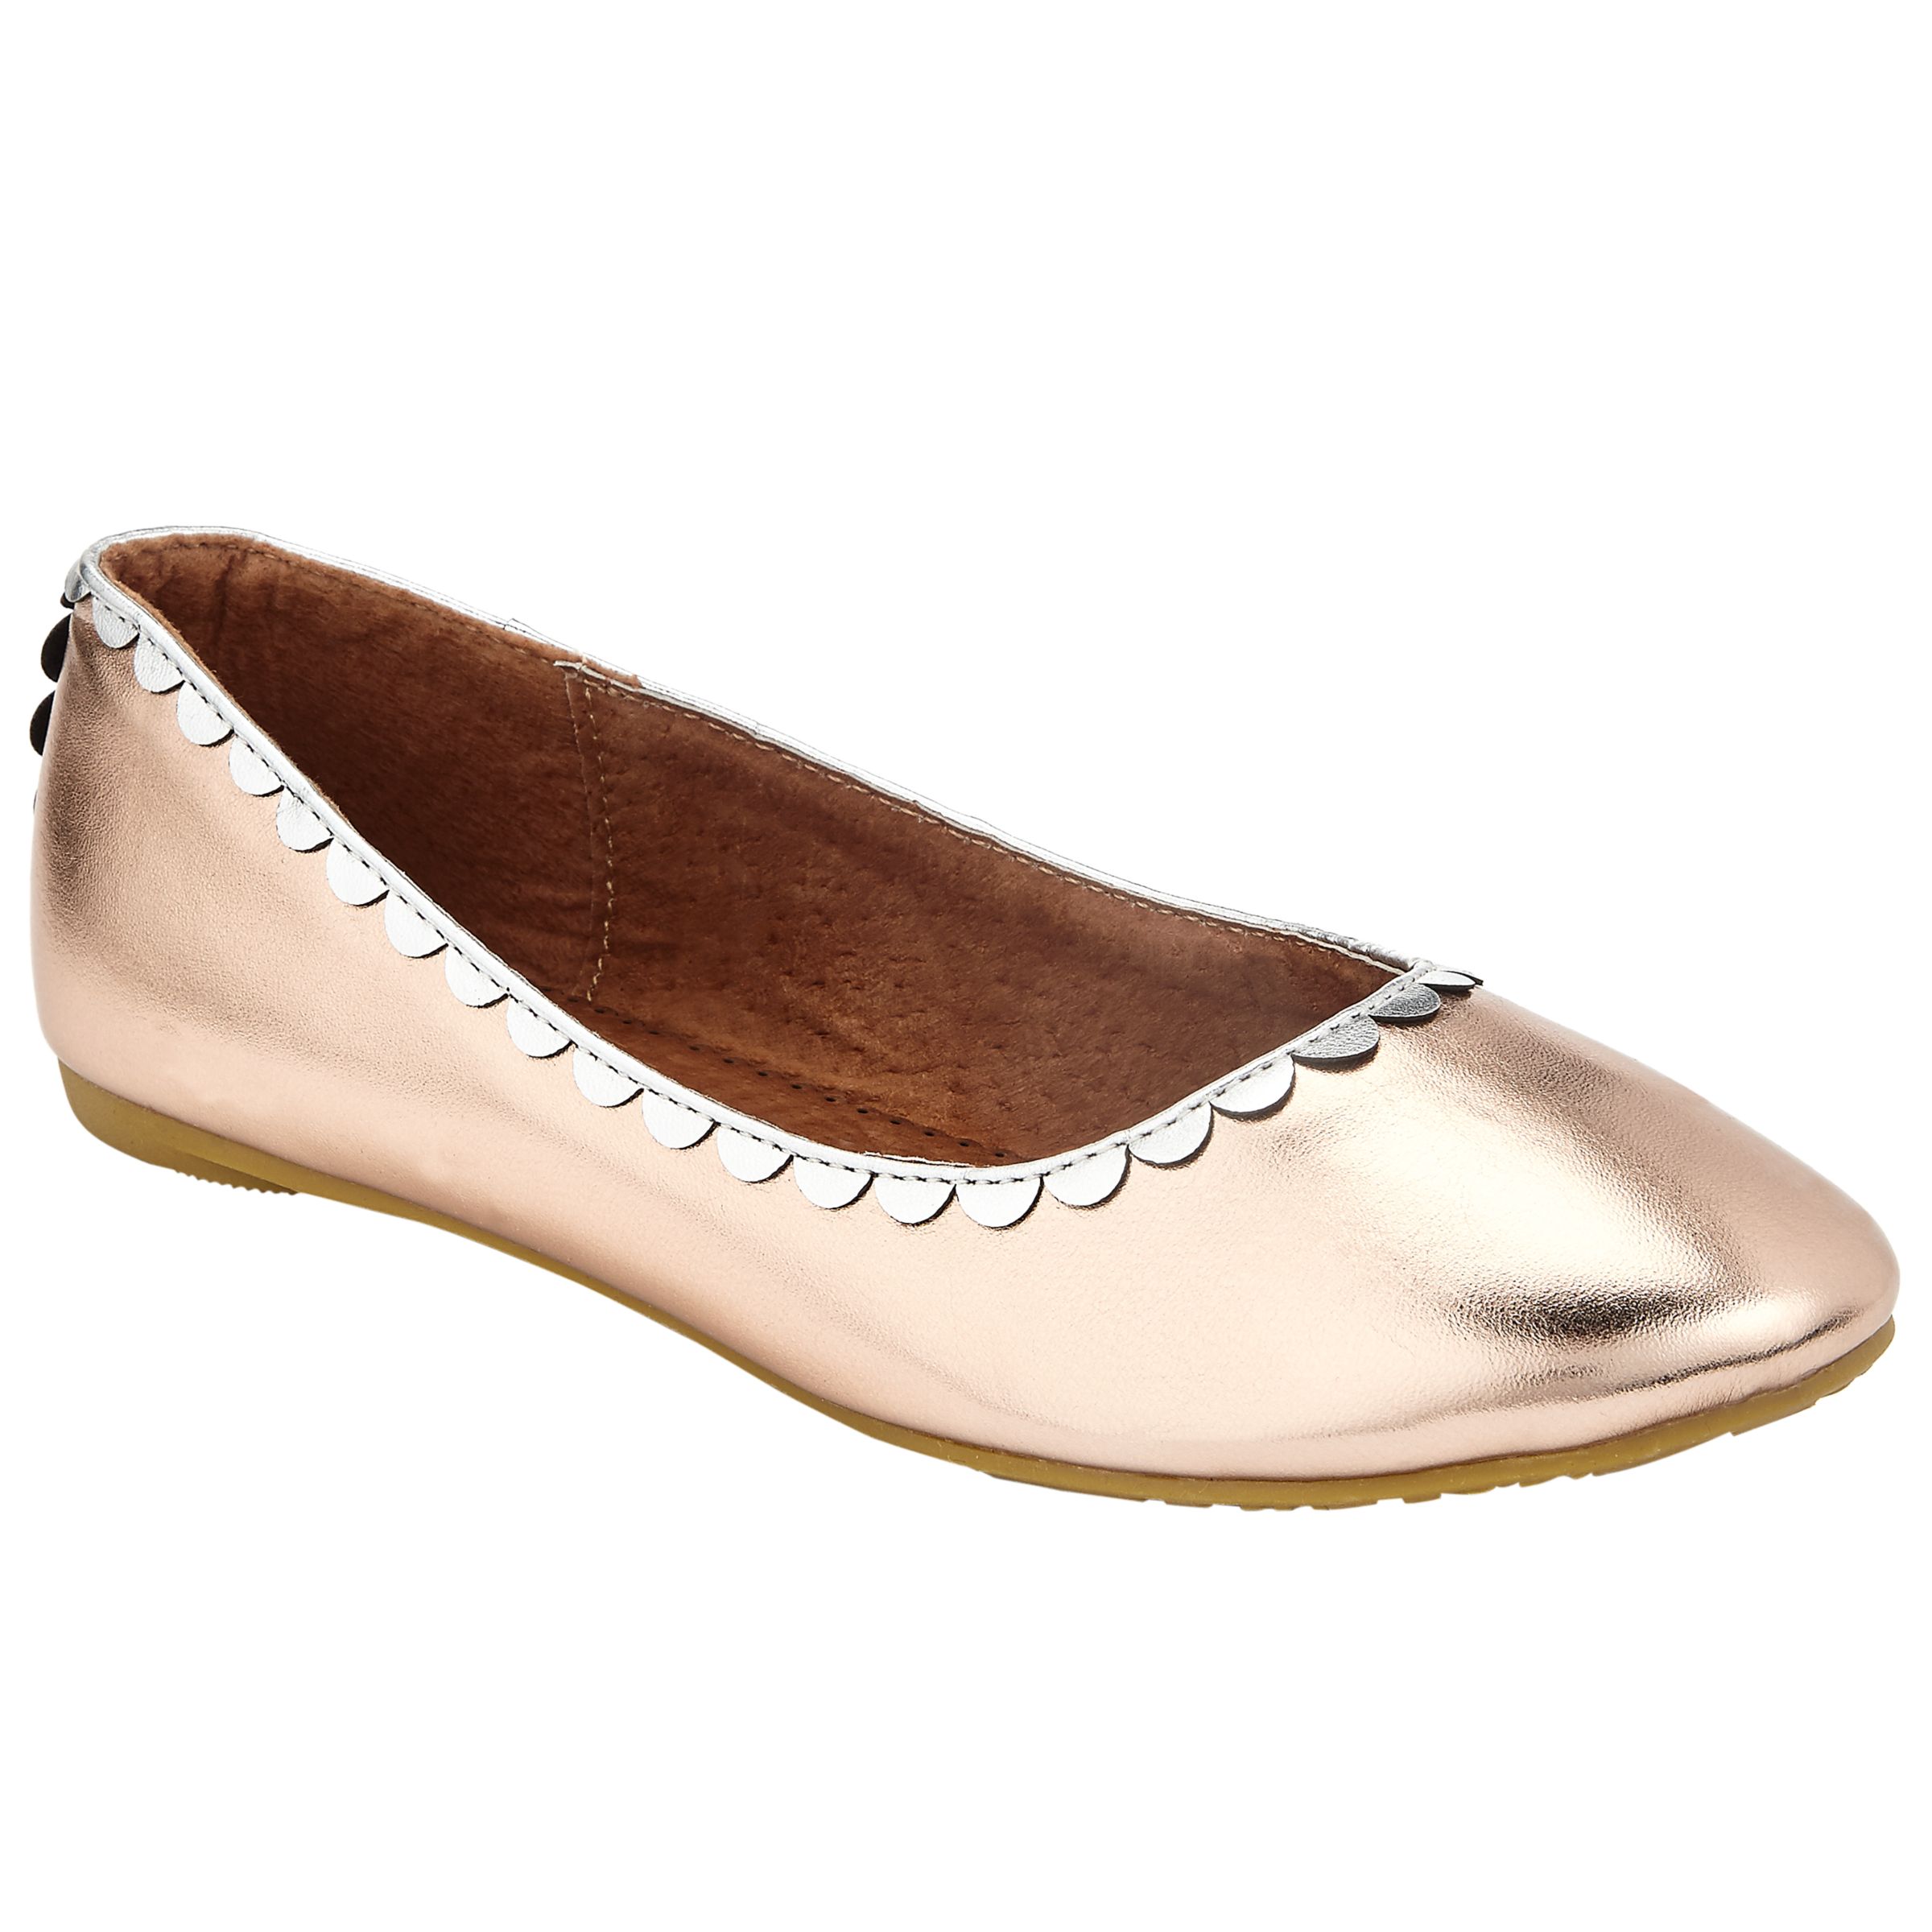 John Lewis & Partners Children's Darcy Scallop Shoes, Rose Gold at John ...